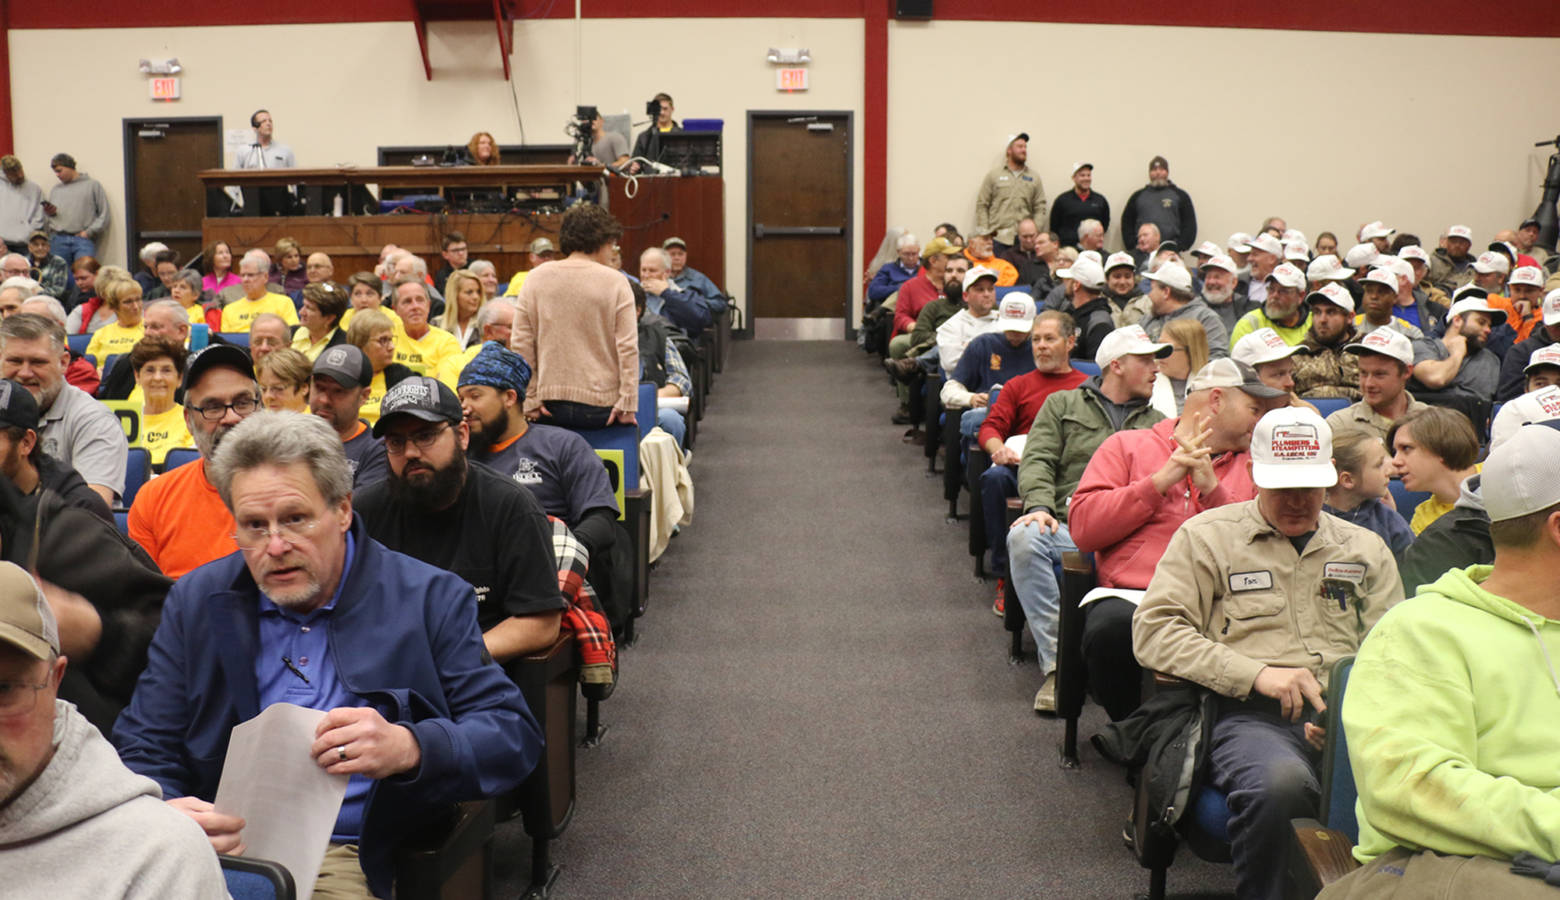 Community members gathered at hearing on an air quality permit for a proposed coal-to-diesel plant in Dale, Indiana. Opponents wore yellow shirts, union workers wore white caps as a show of support. (Isaiah Seibert/WNIN)